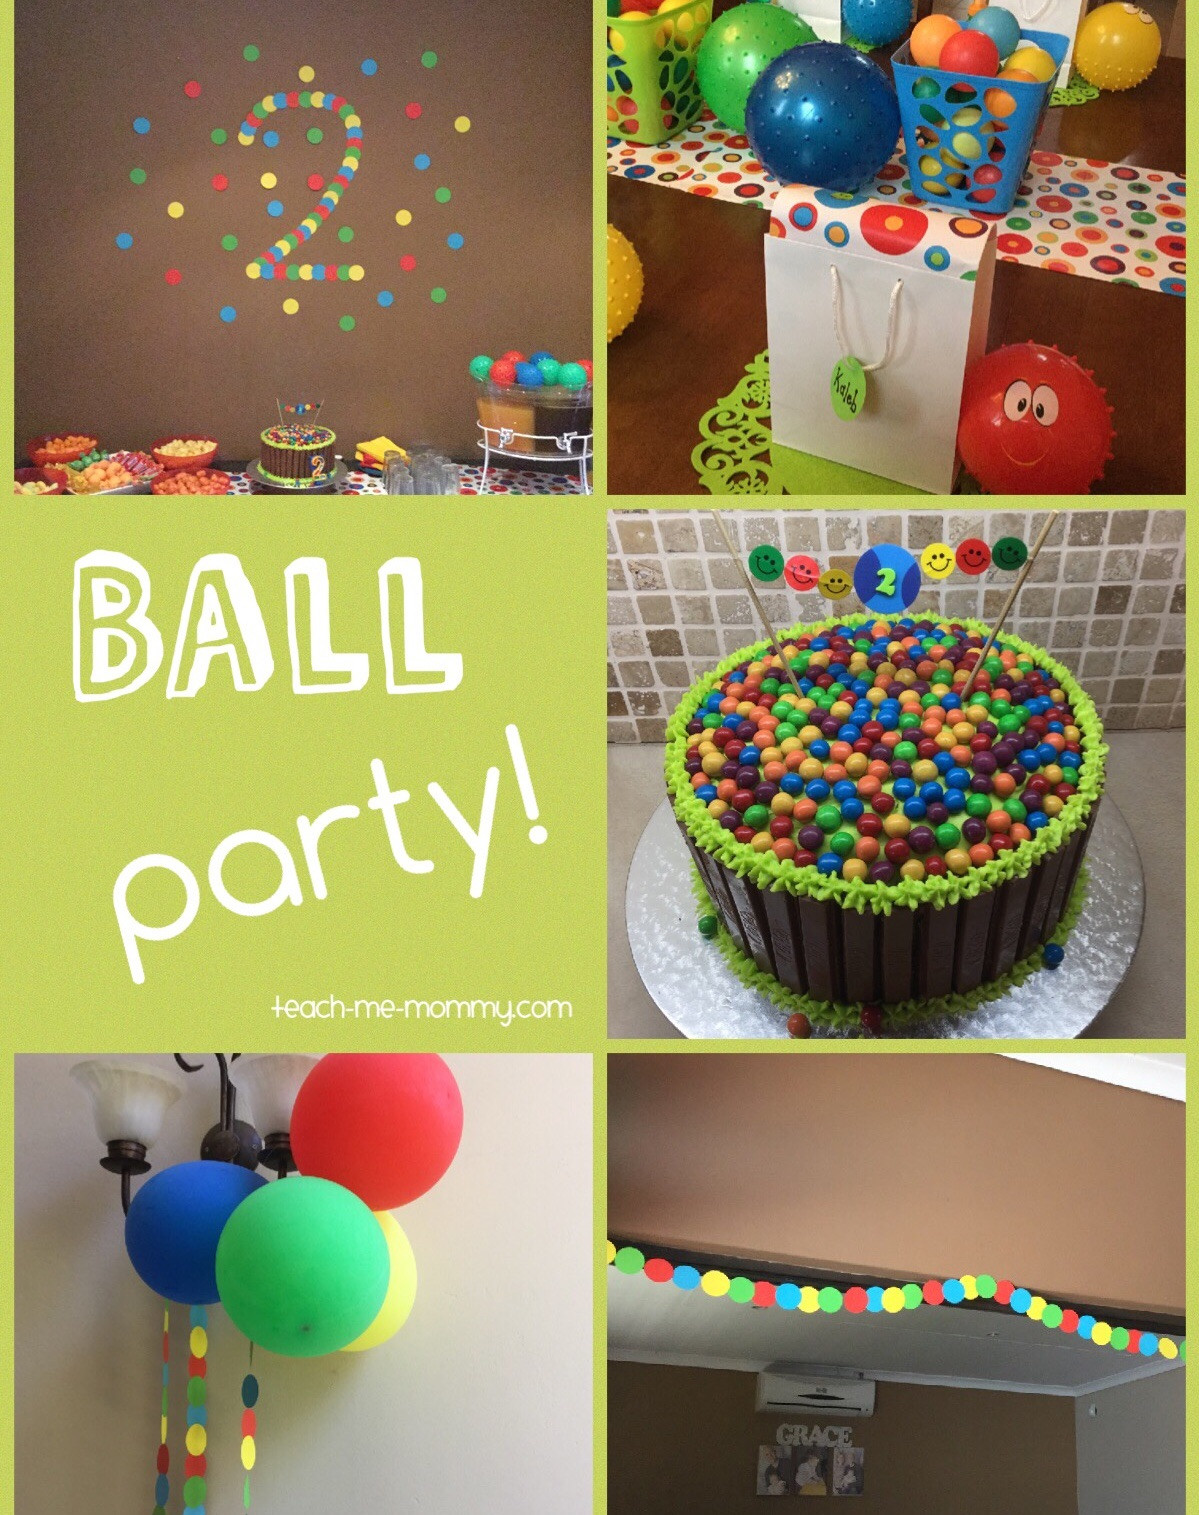 2 Year Old Boy Birthday Gift Ideas
 Ball Themed Party for a 2 Year Old Teach Me Mommy